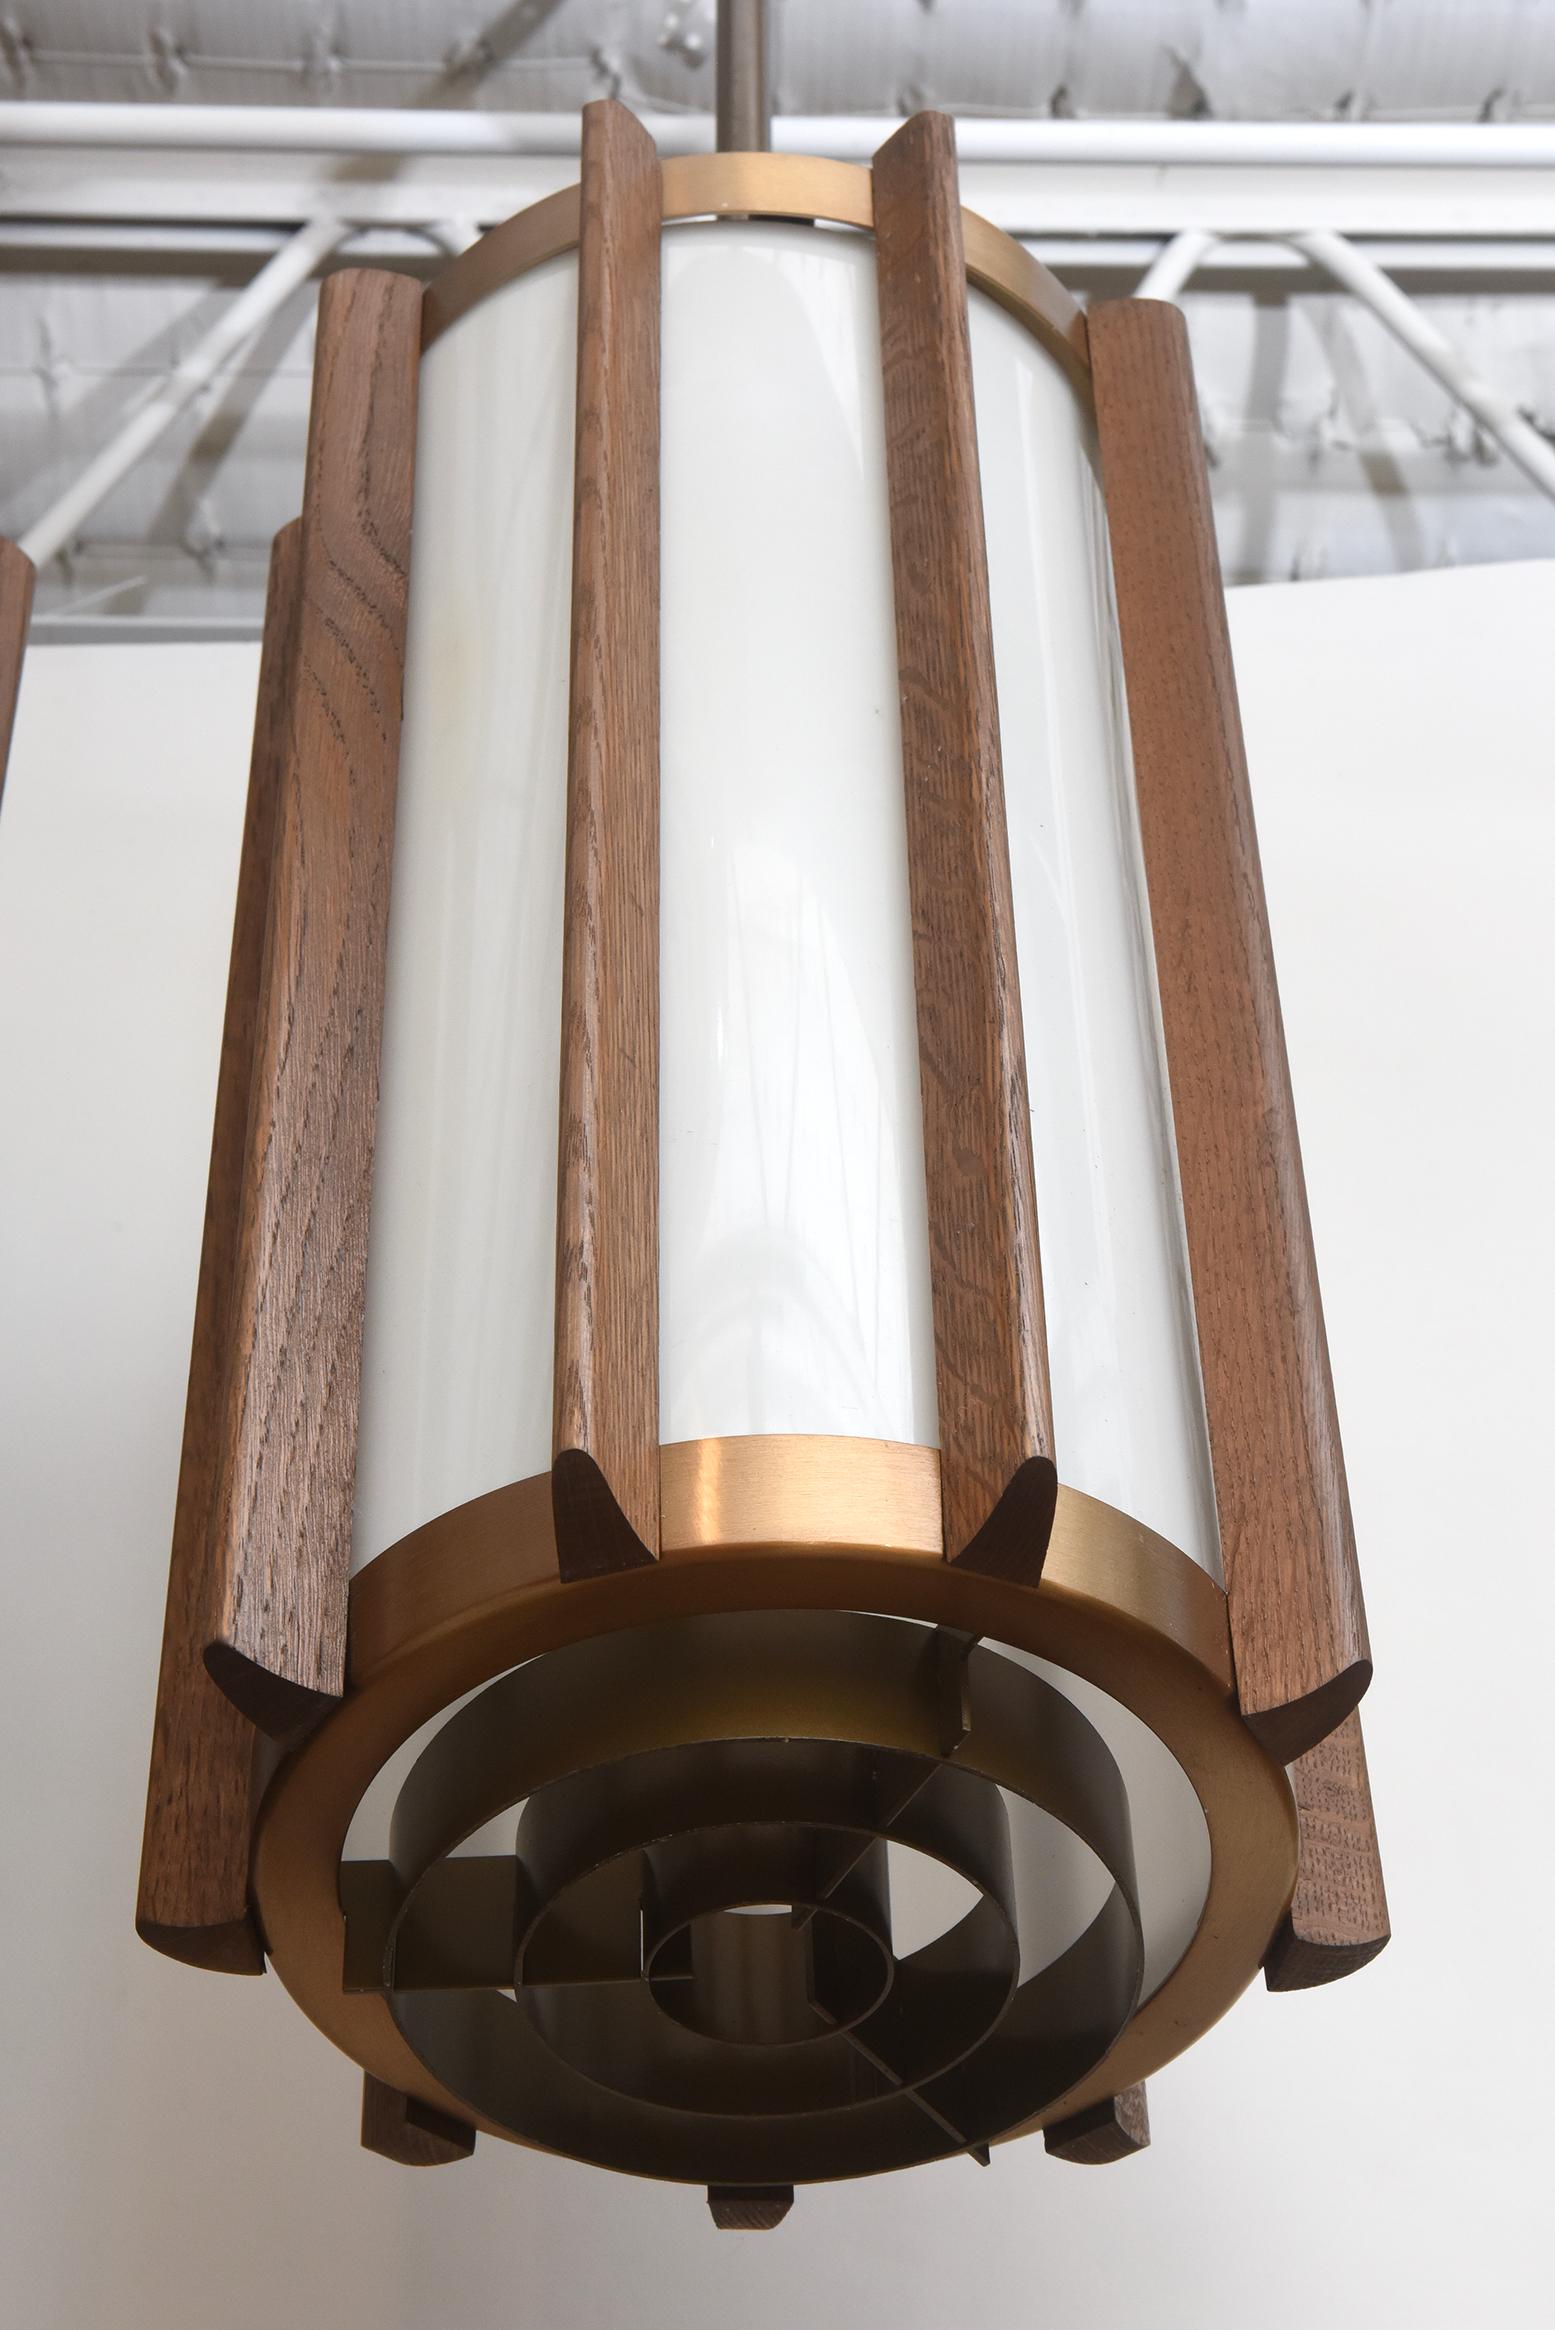 A masterful mix of materials and scale combine to make these Mid-Century Modern pendants in warm walnut, brass, and acrylic the perfect fixture in so many different environments. Originally from a church or commercial building, the pendants could